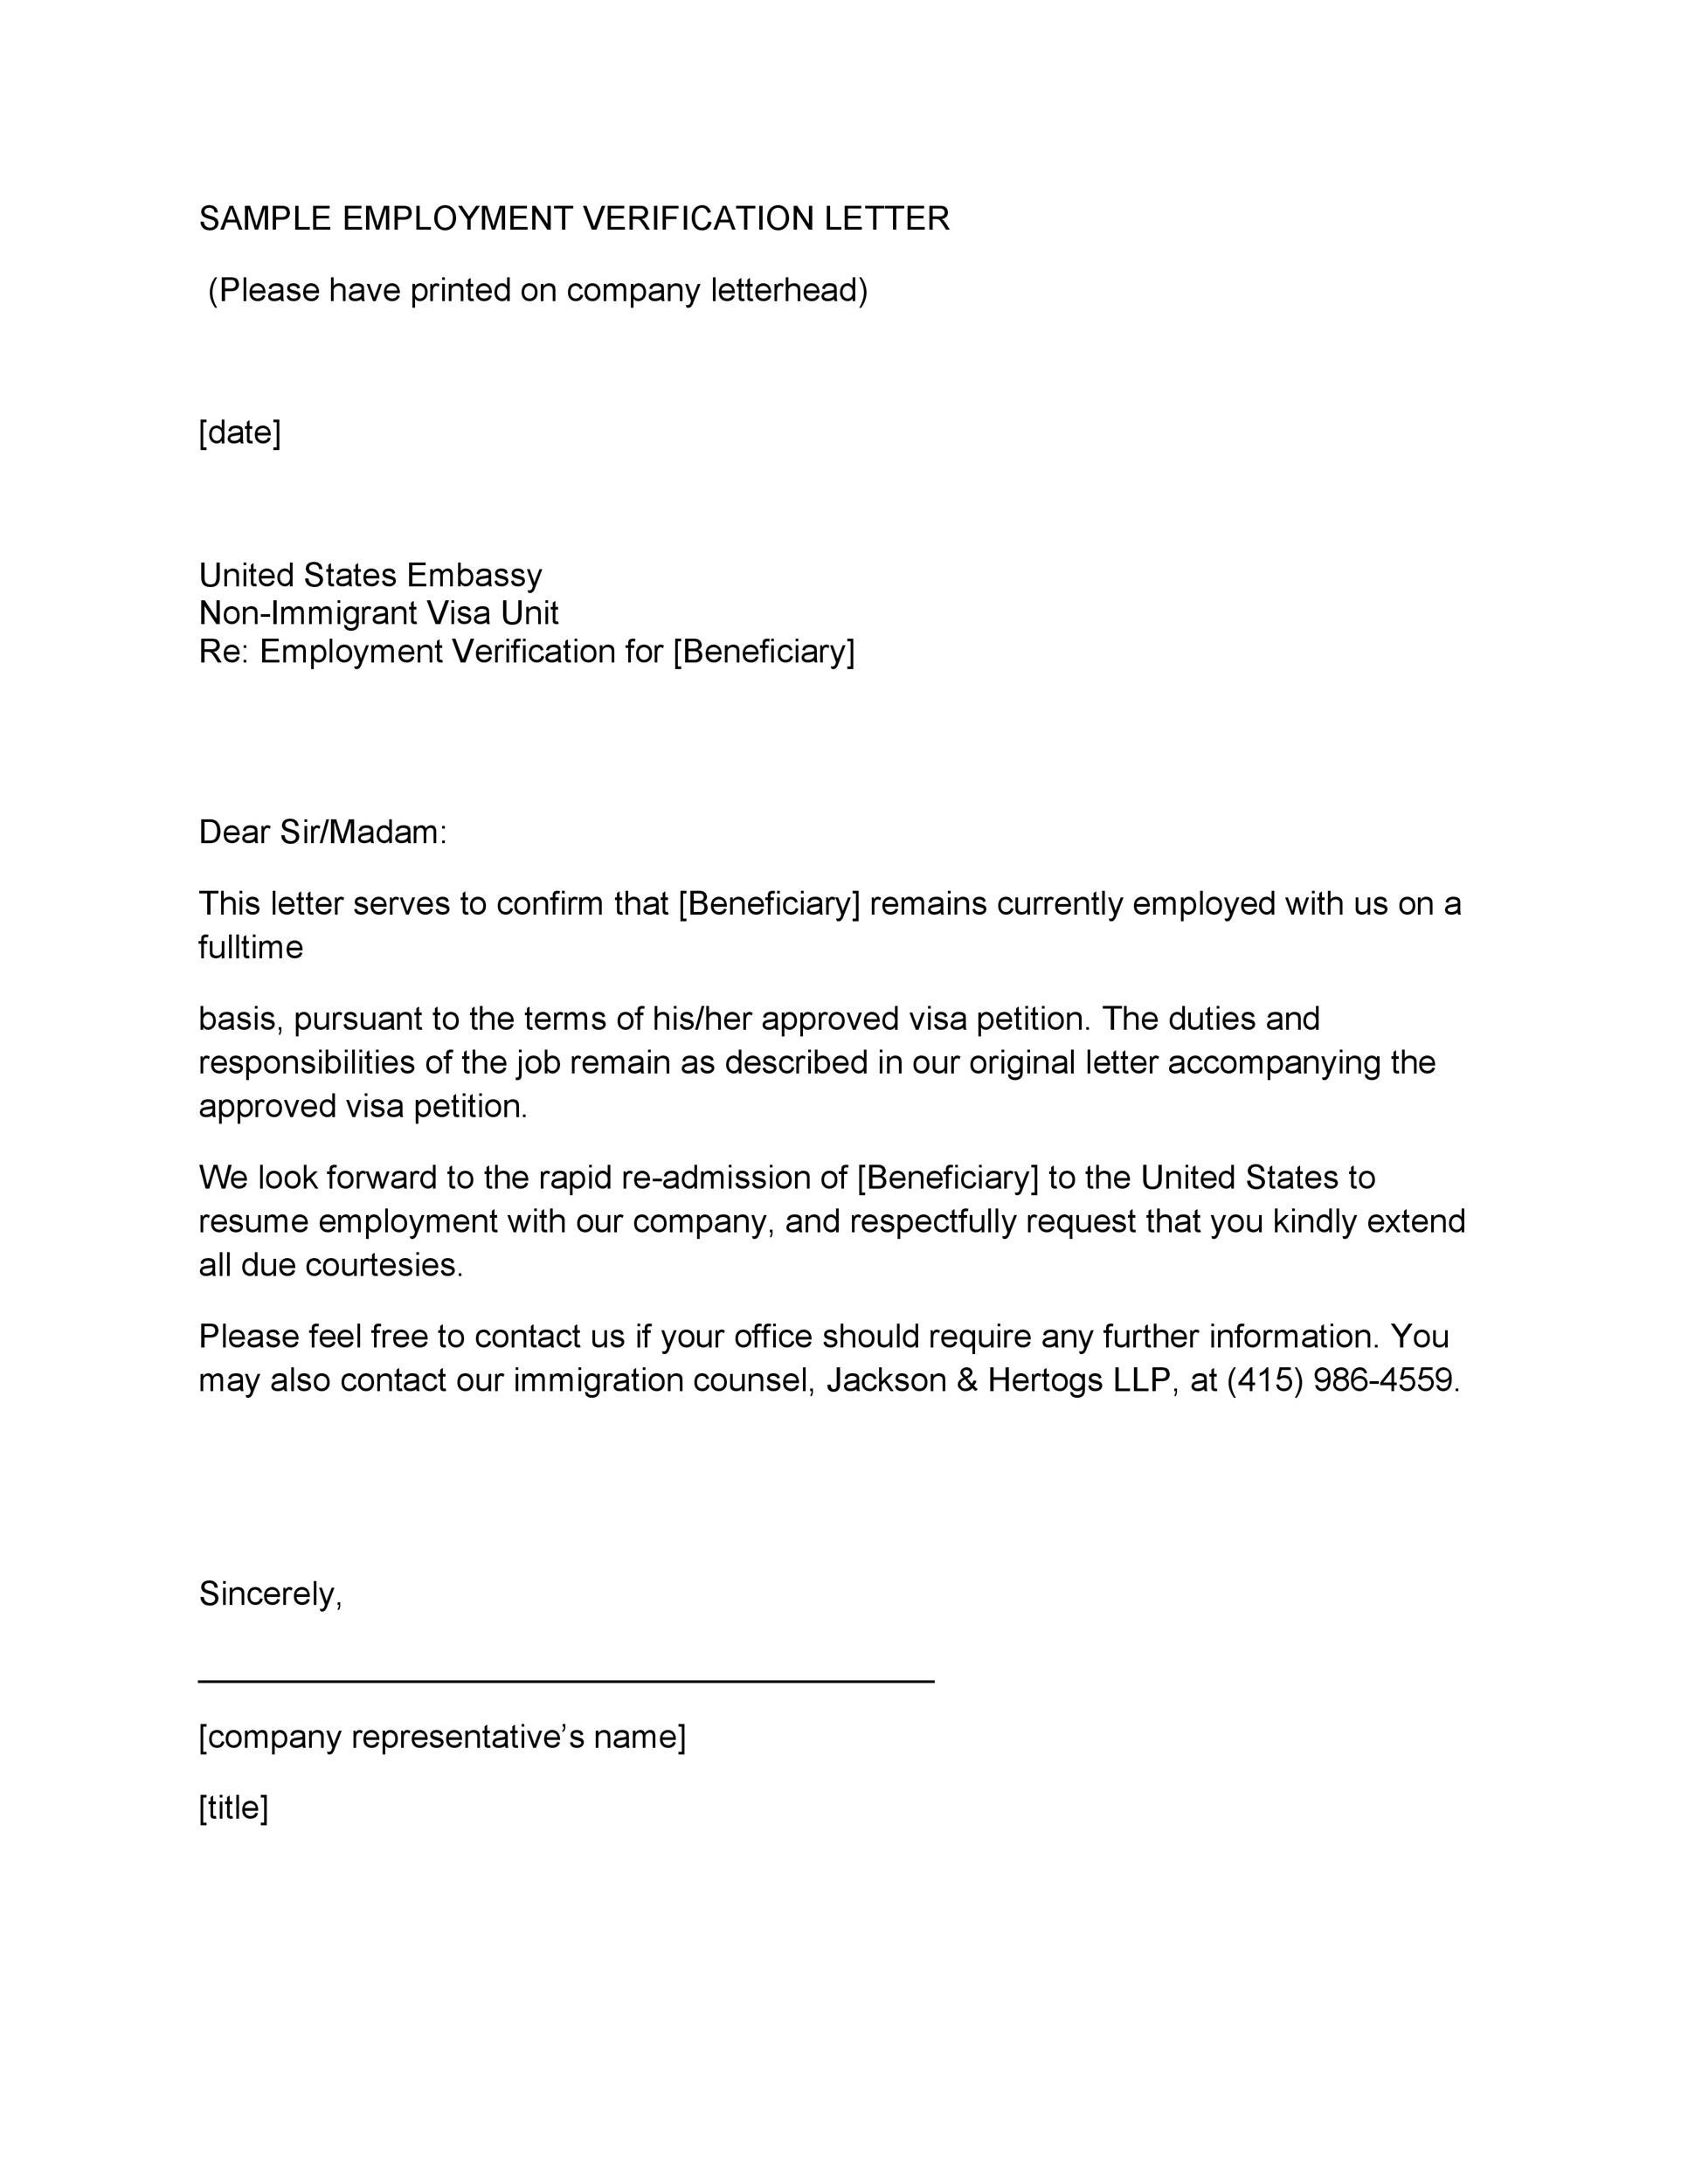 Proof Of Employment Letter Template Word from templatelab.com